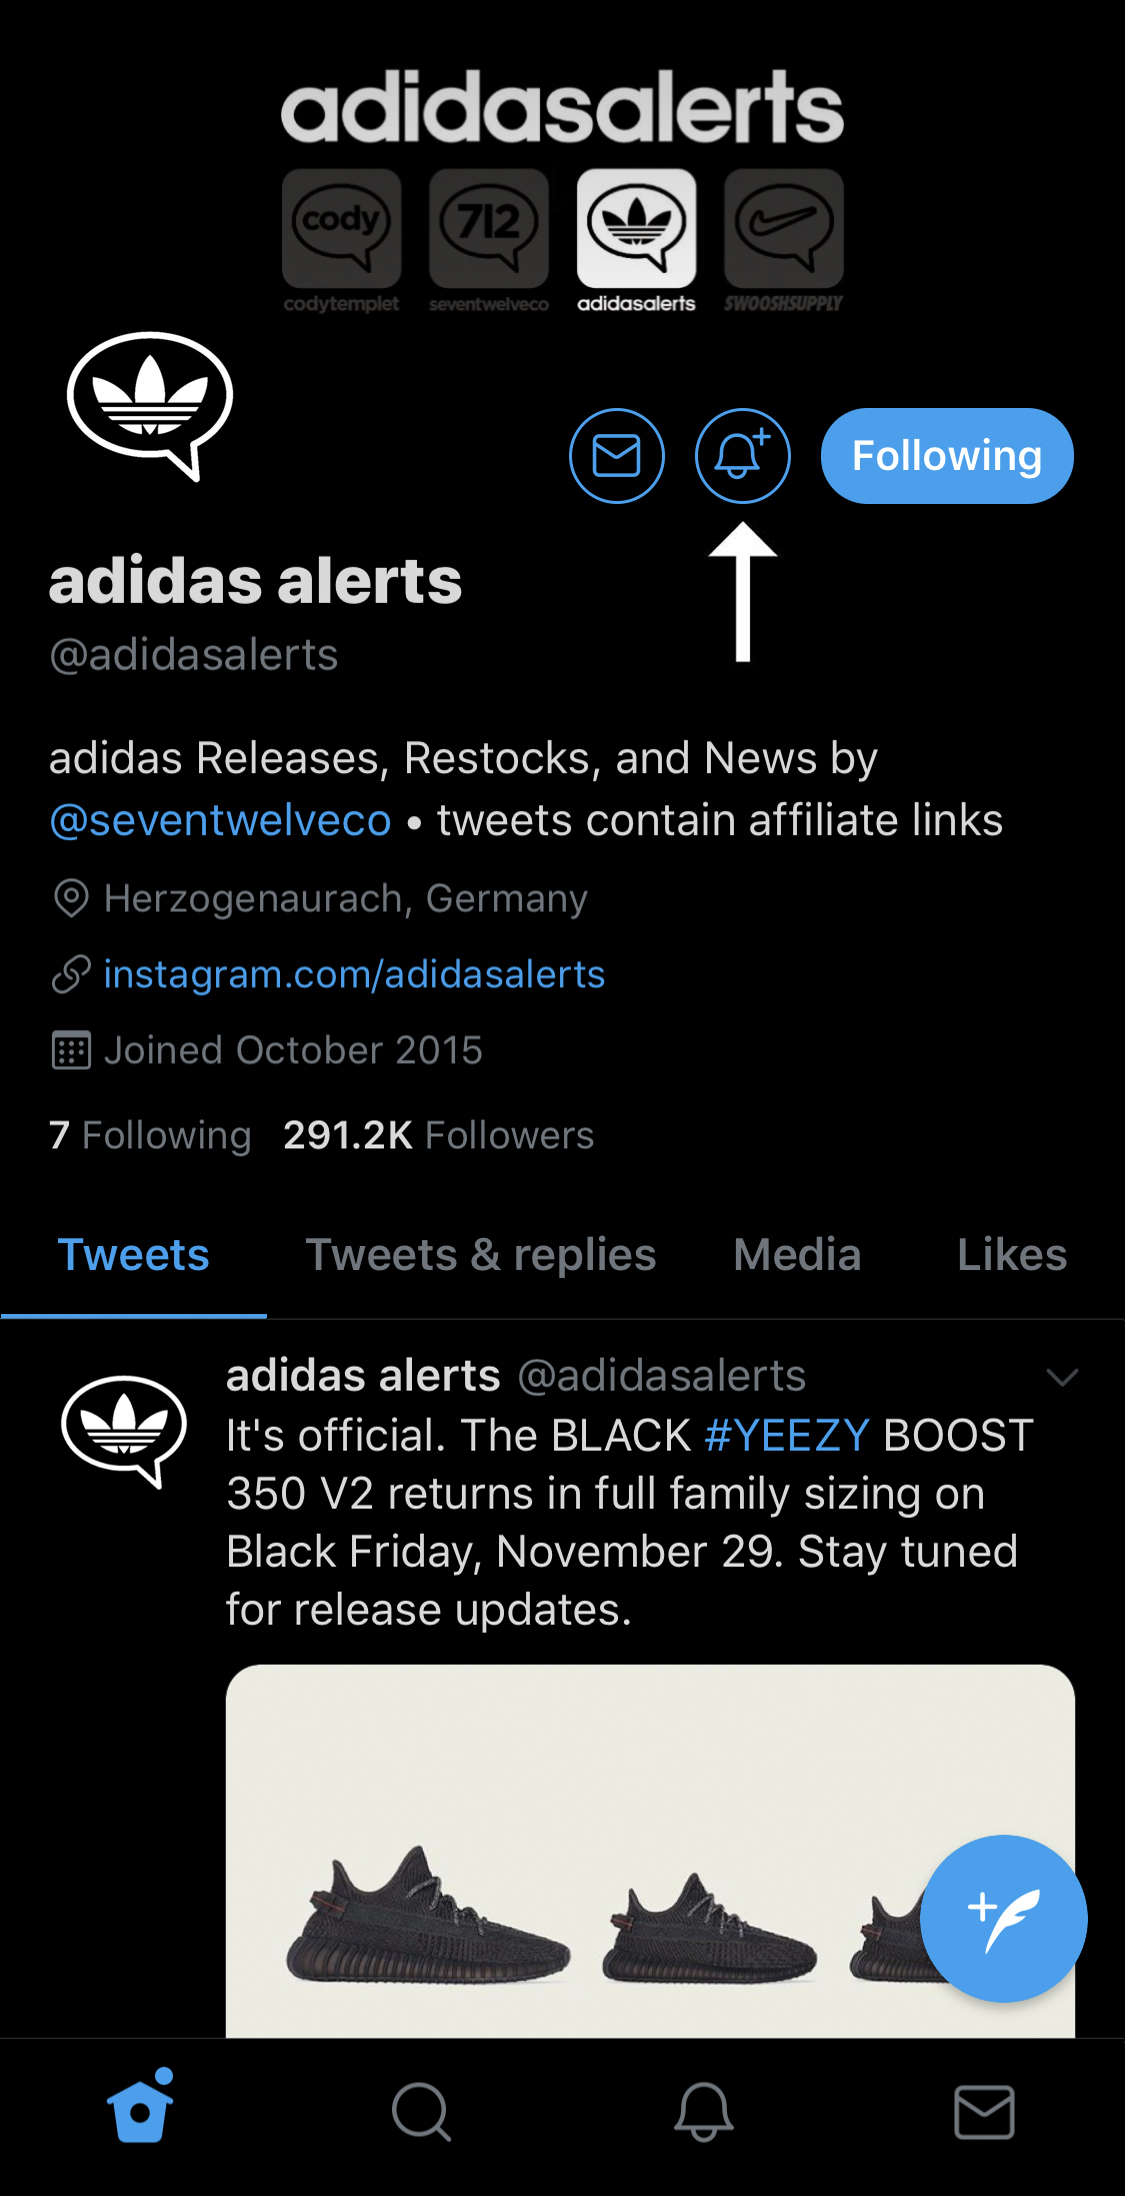 adidas alerts on Twitter: "Don't miss any alerts this Black Friday season! Turn on mobile push notifications in the Twitter app by tapping the icon and selecting “All Tweets.” https://t.co/Q7EqP8rvti" /